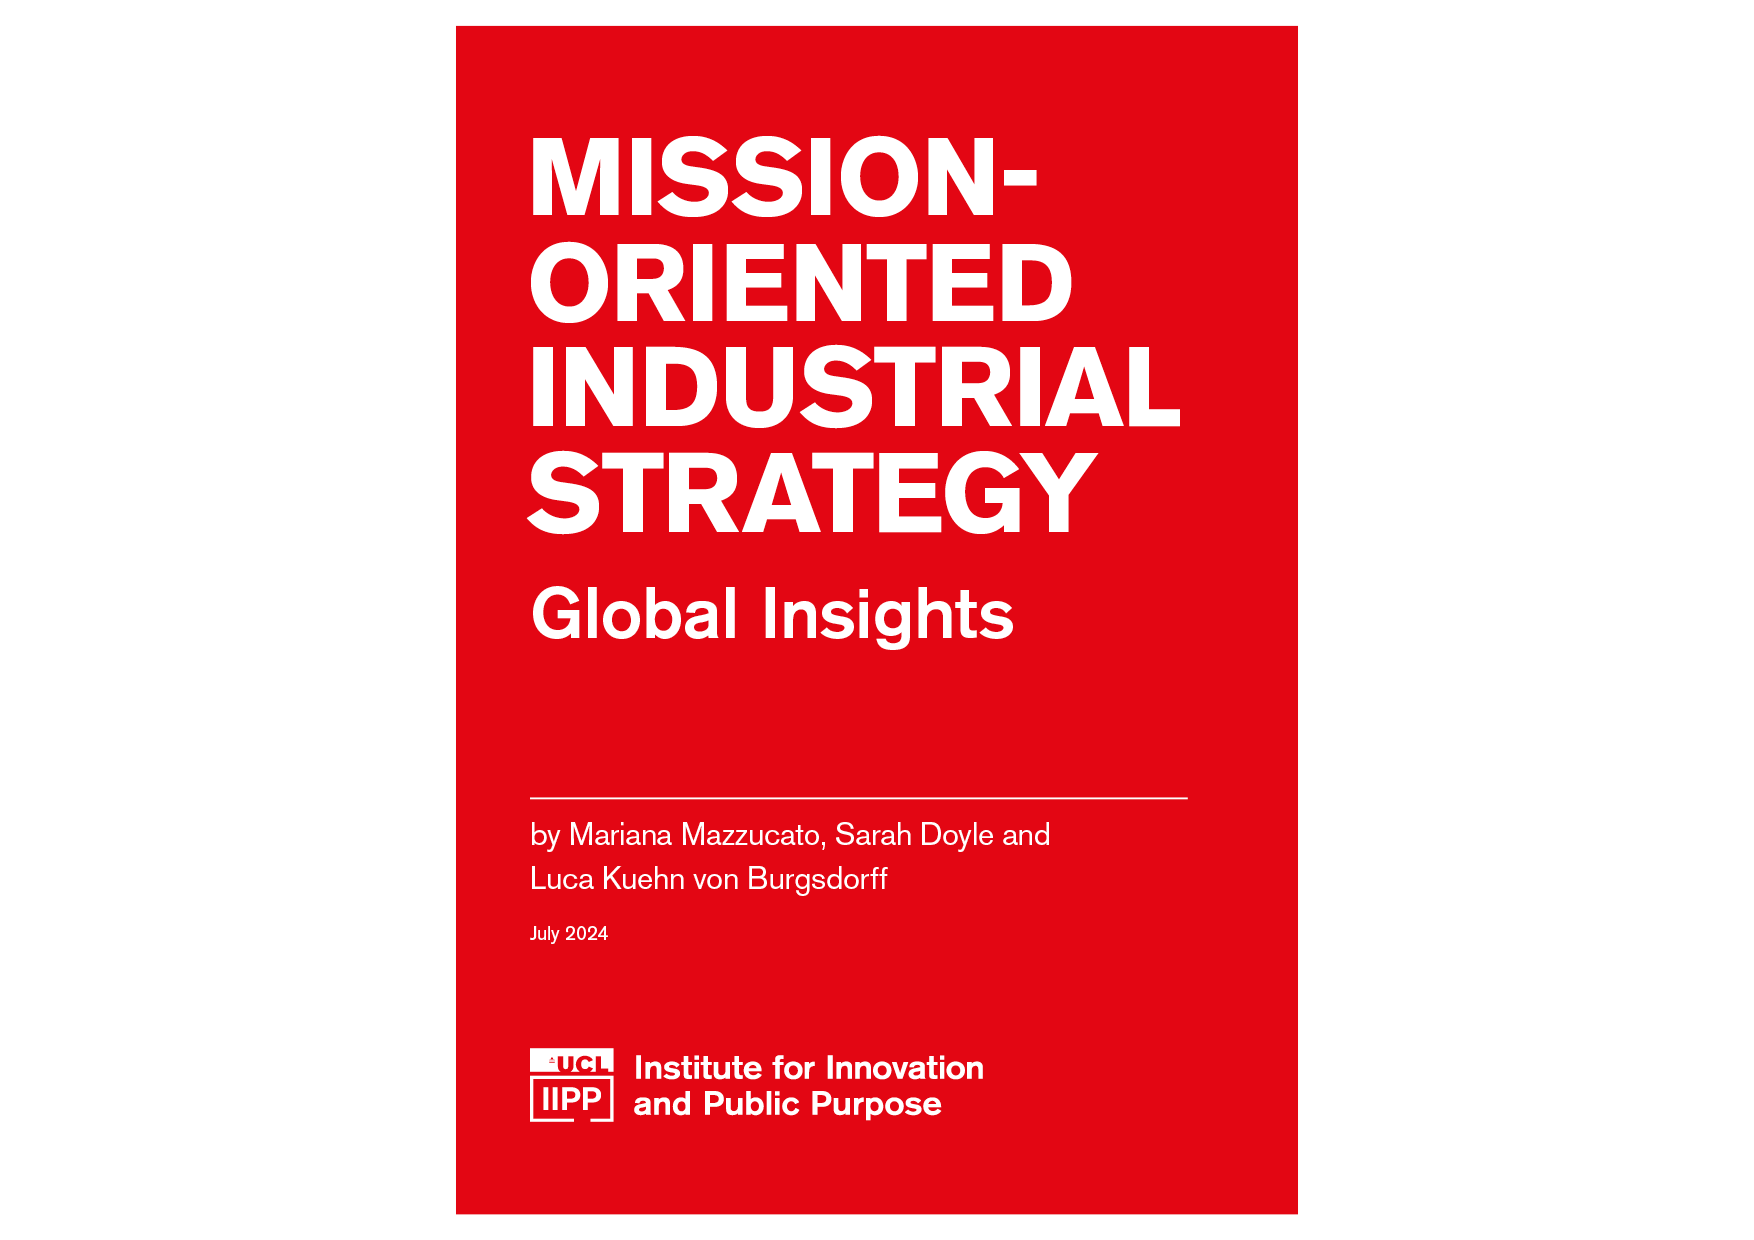 Mission-oriented industrial strategy